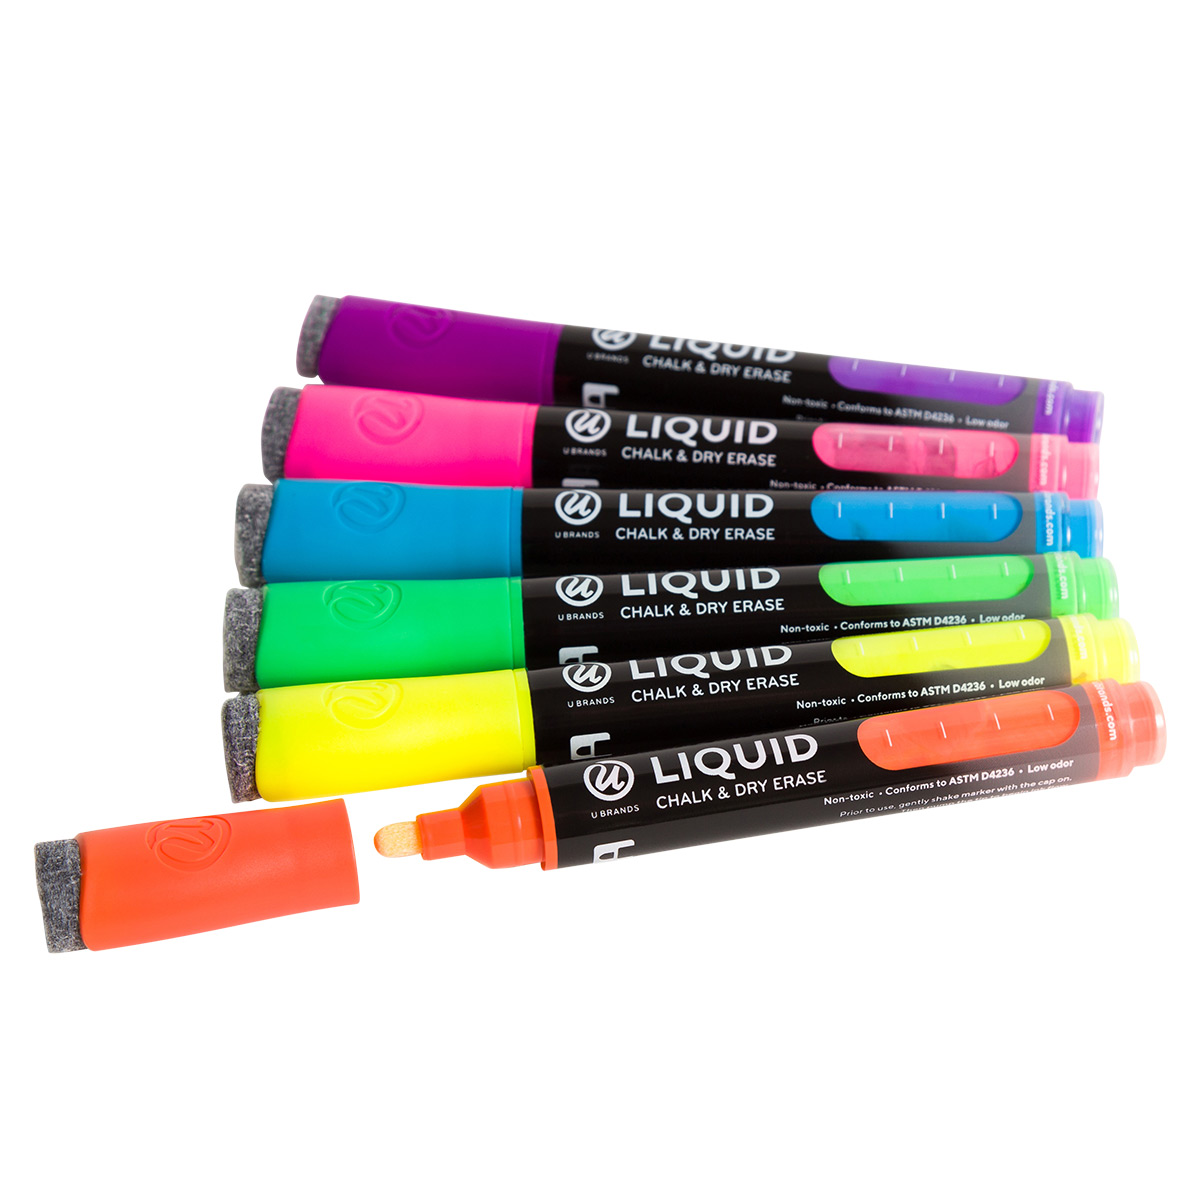 U Brands Colored Liquid Chalk Dry-Erase Markers, Assorted Colors, 4 Count